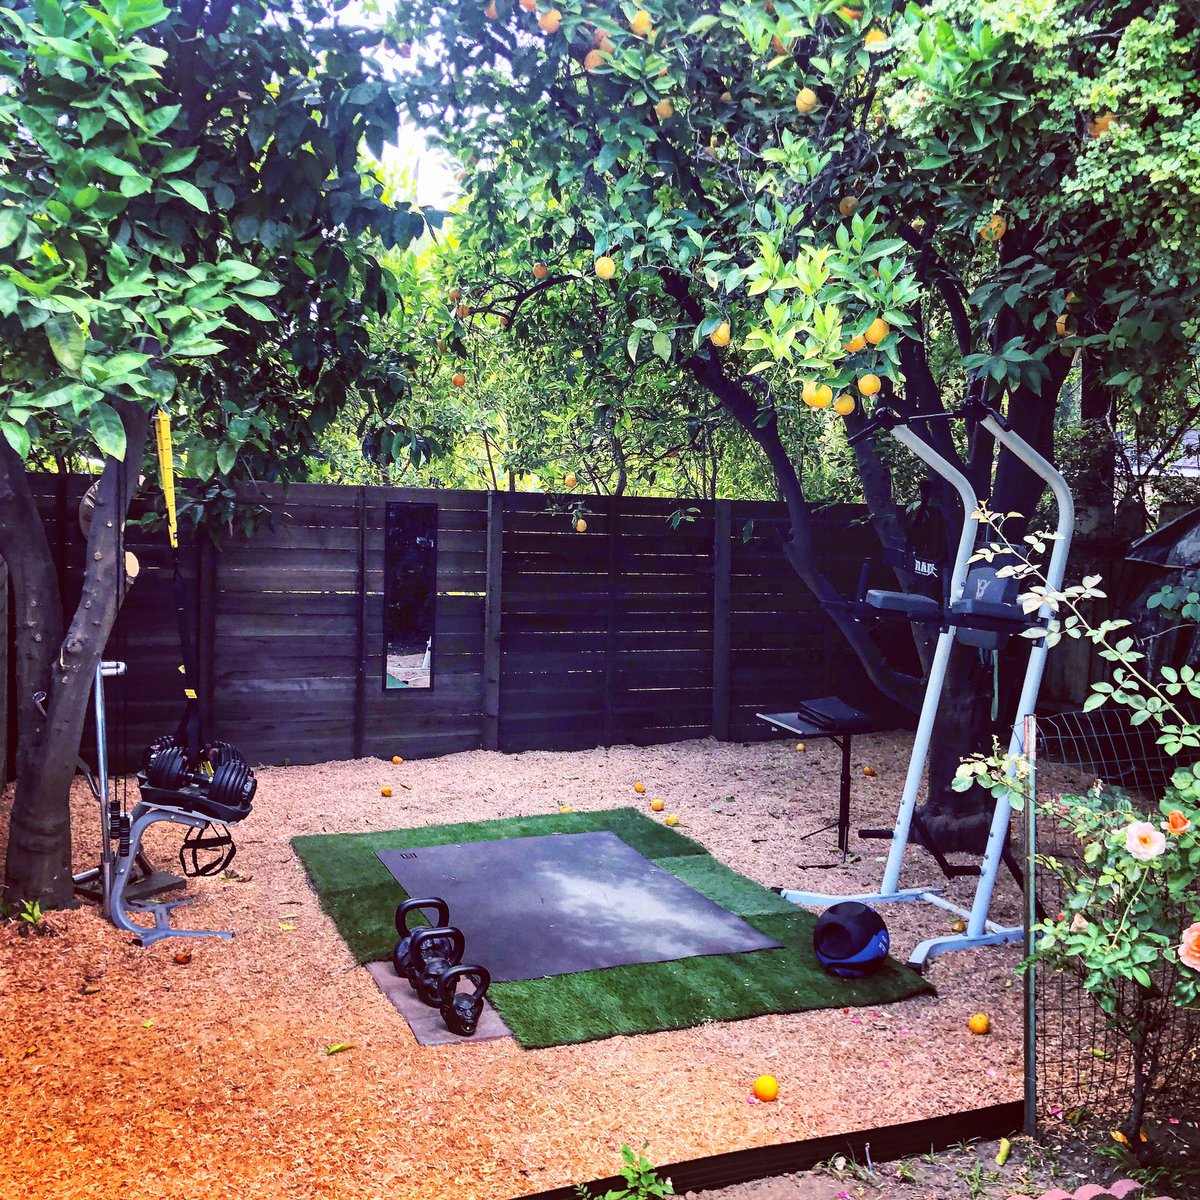 Robbie Daymond On Twitter A Haiku For My New Backyard Gym Lie Smote Before Me My Enemy Breathes His Last The Scent Of Oranges